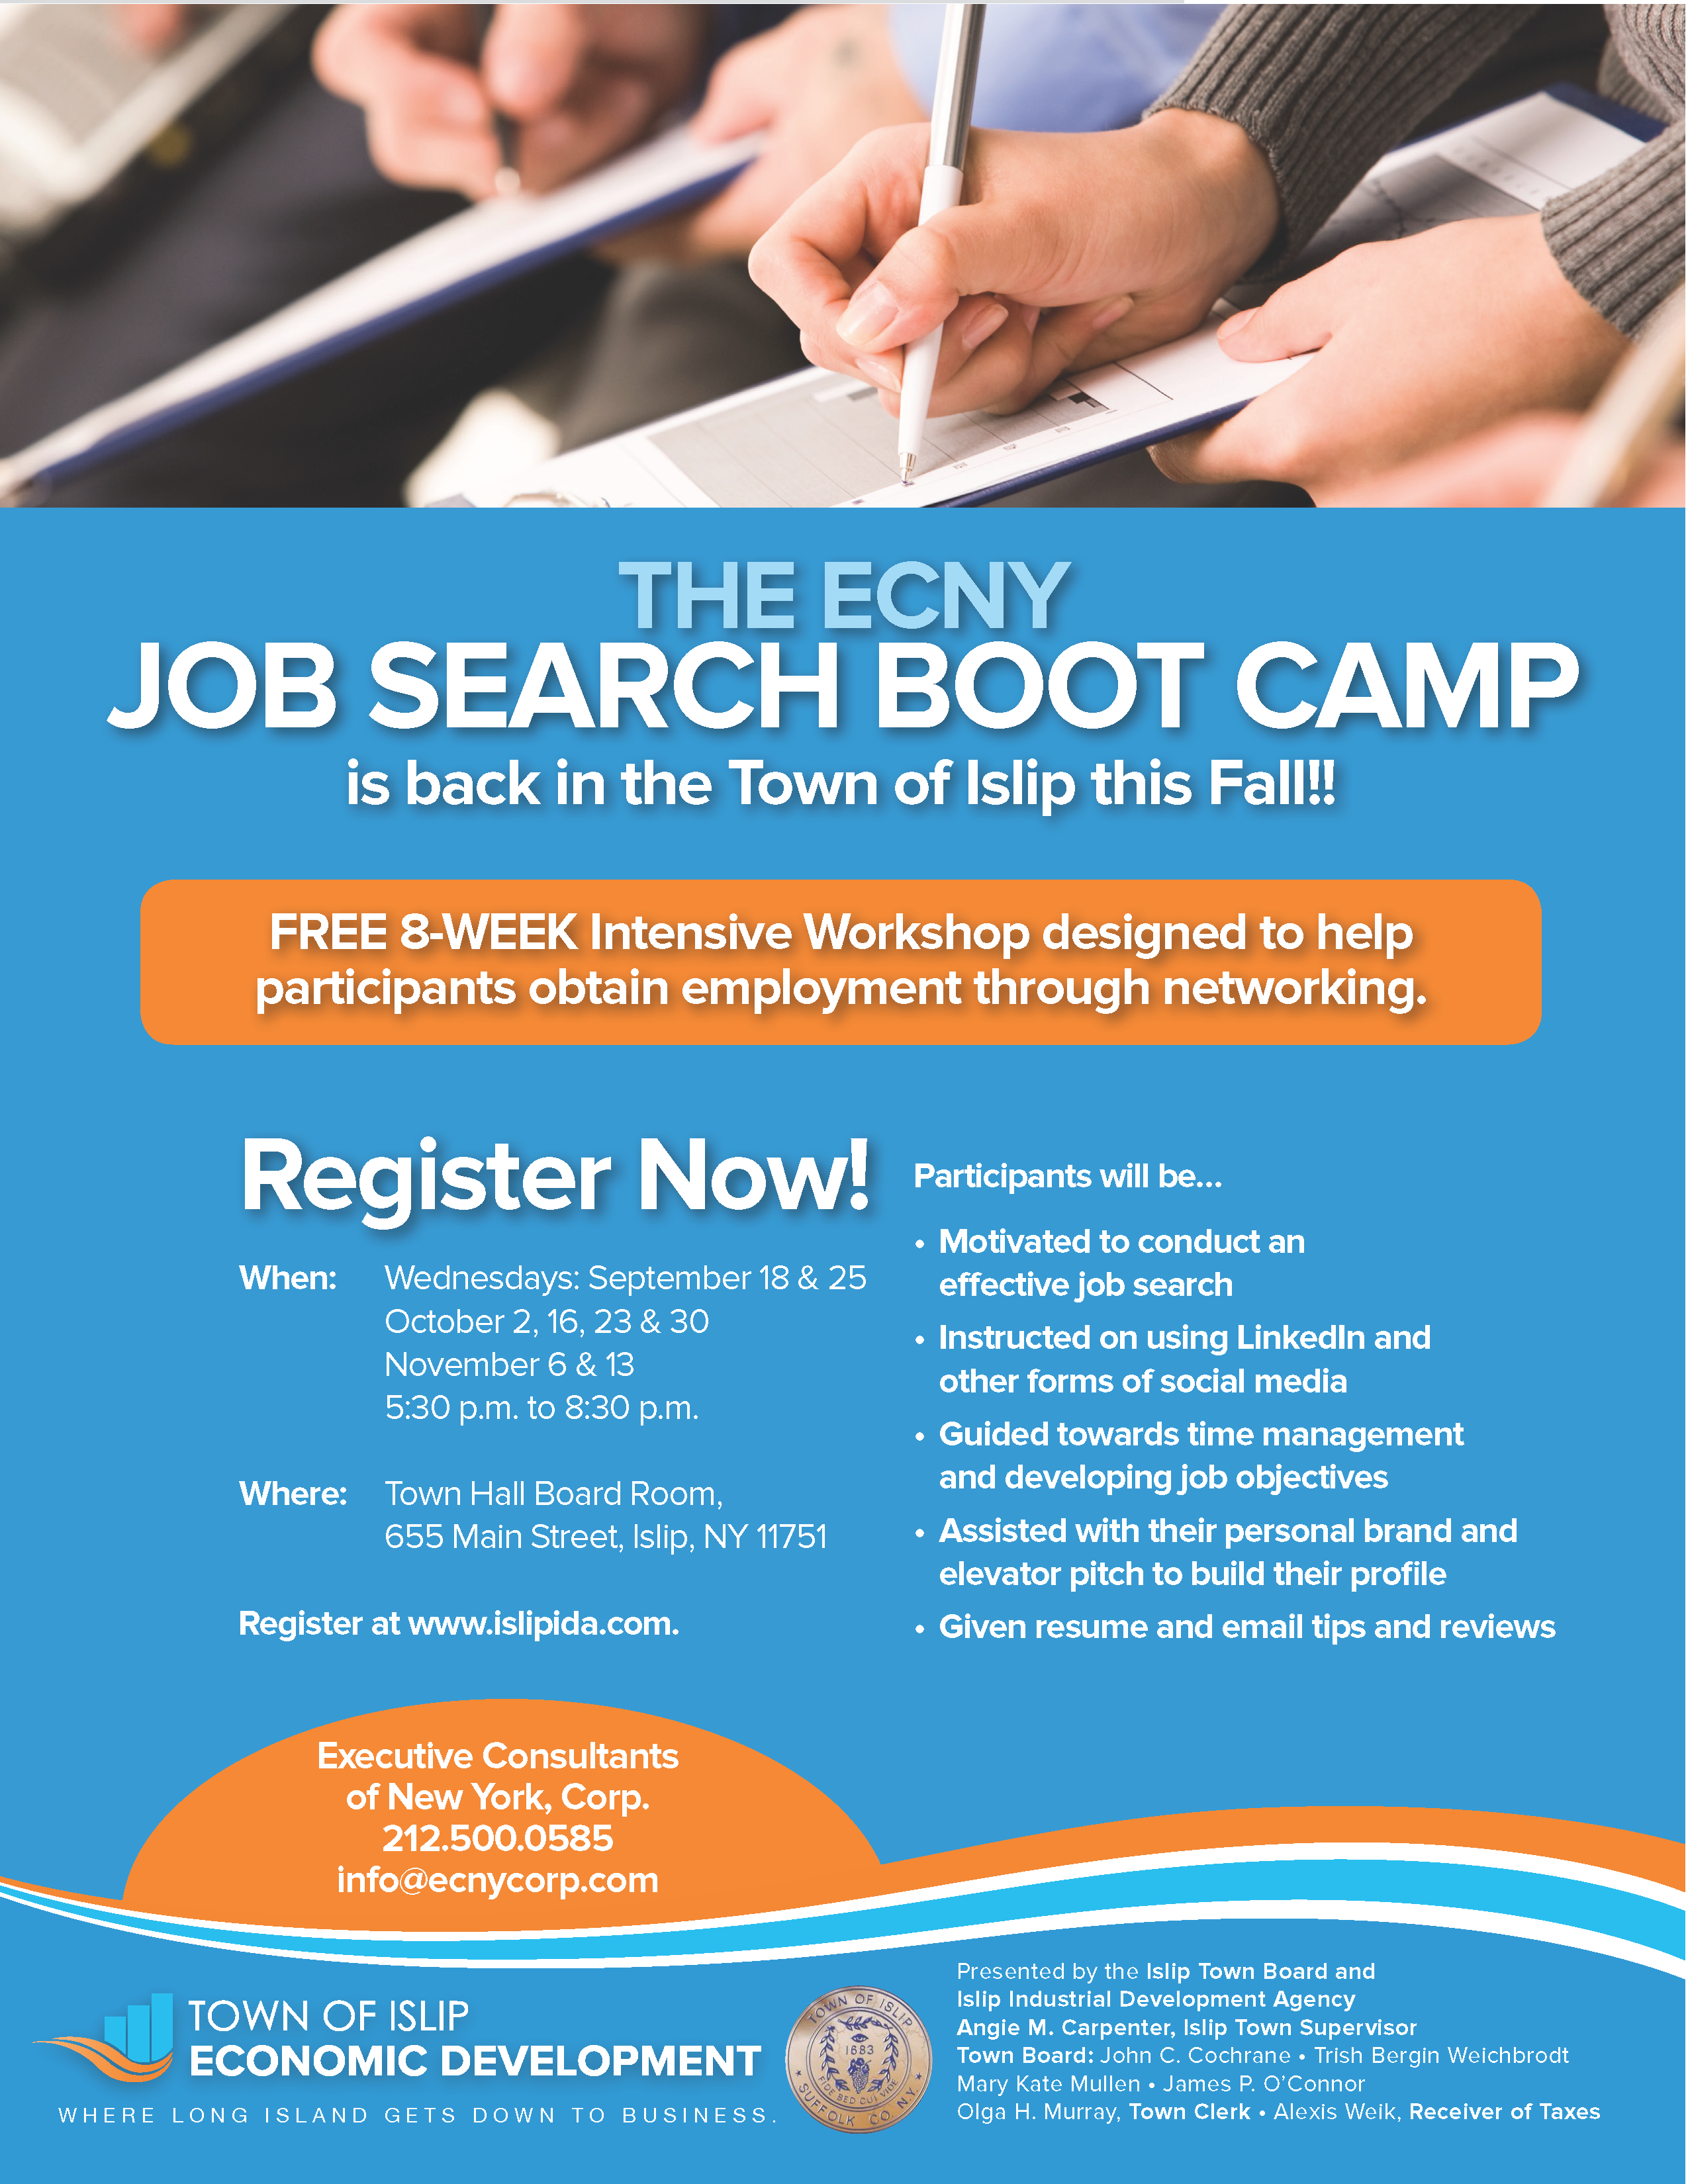 A flyer image announcing the Town of Islip Economic Development Job Search Boot Camp on the Fall dates of 9/18, 9/25, 10/2, 10/16, 10/23, 10/30, 11/6, 11/13 at 5:30pm to 8:30pm at Islip Town Hall. Call 212-500-0585 for more information